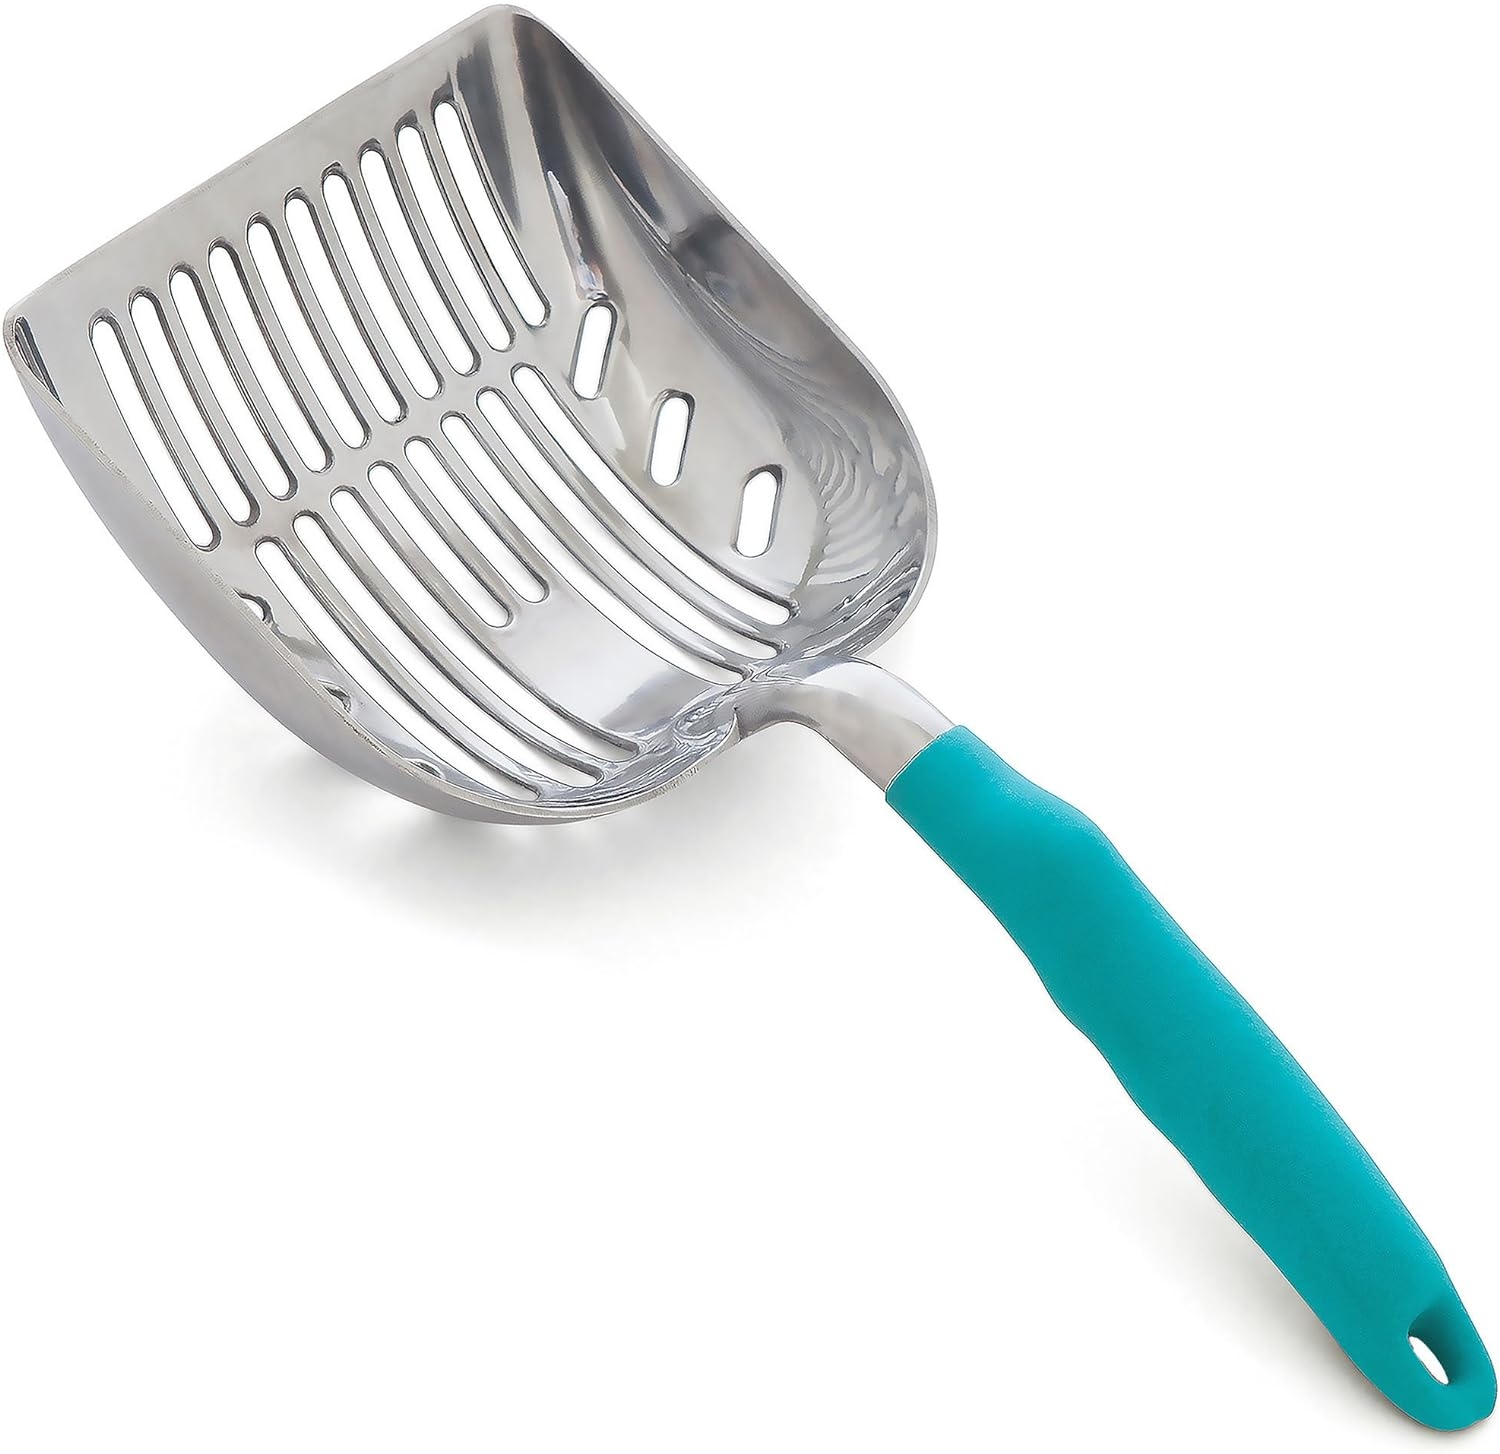 DuraScoop Jumbo Cat Litter Scoop, All Metal End-to-End with Solid Core, Sifter with Deep Shovel, Multi-Cat Tested Accept No Substitute for the Original (colors may vary)